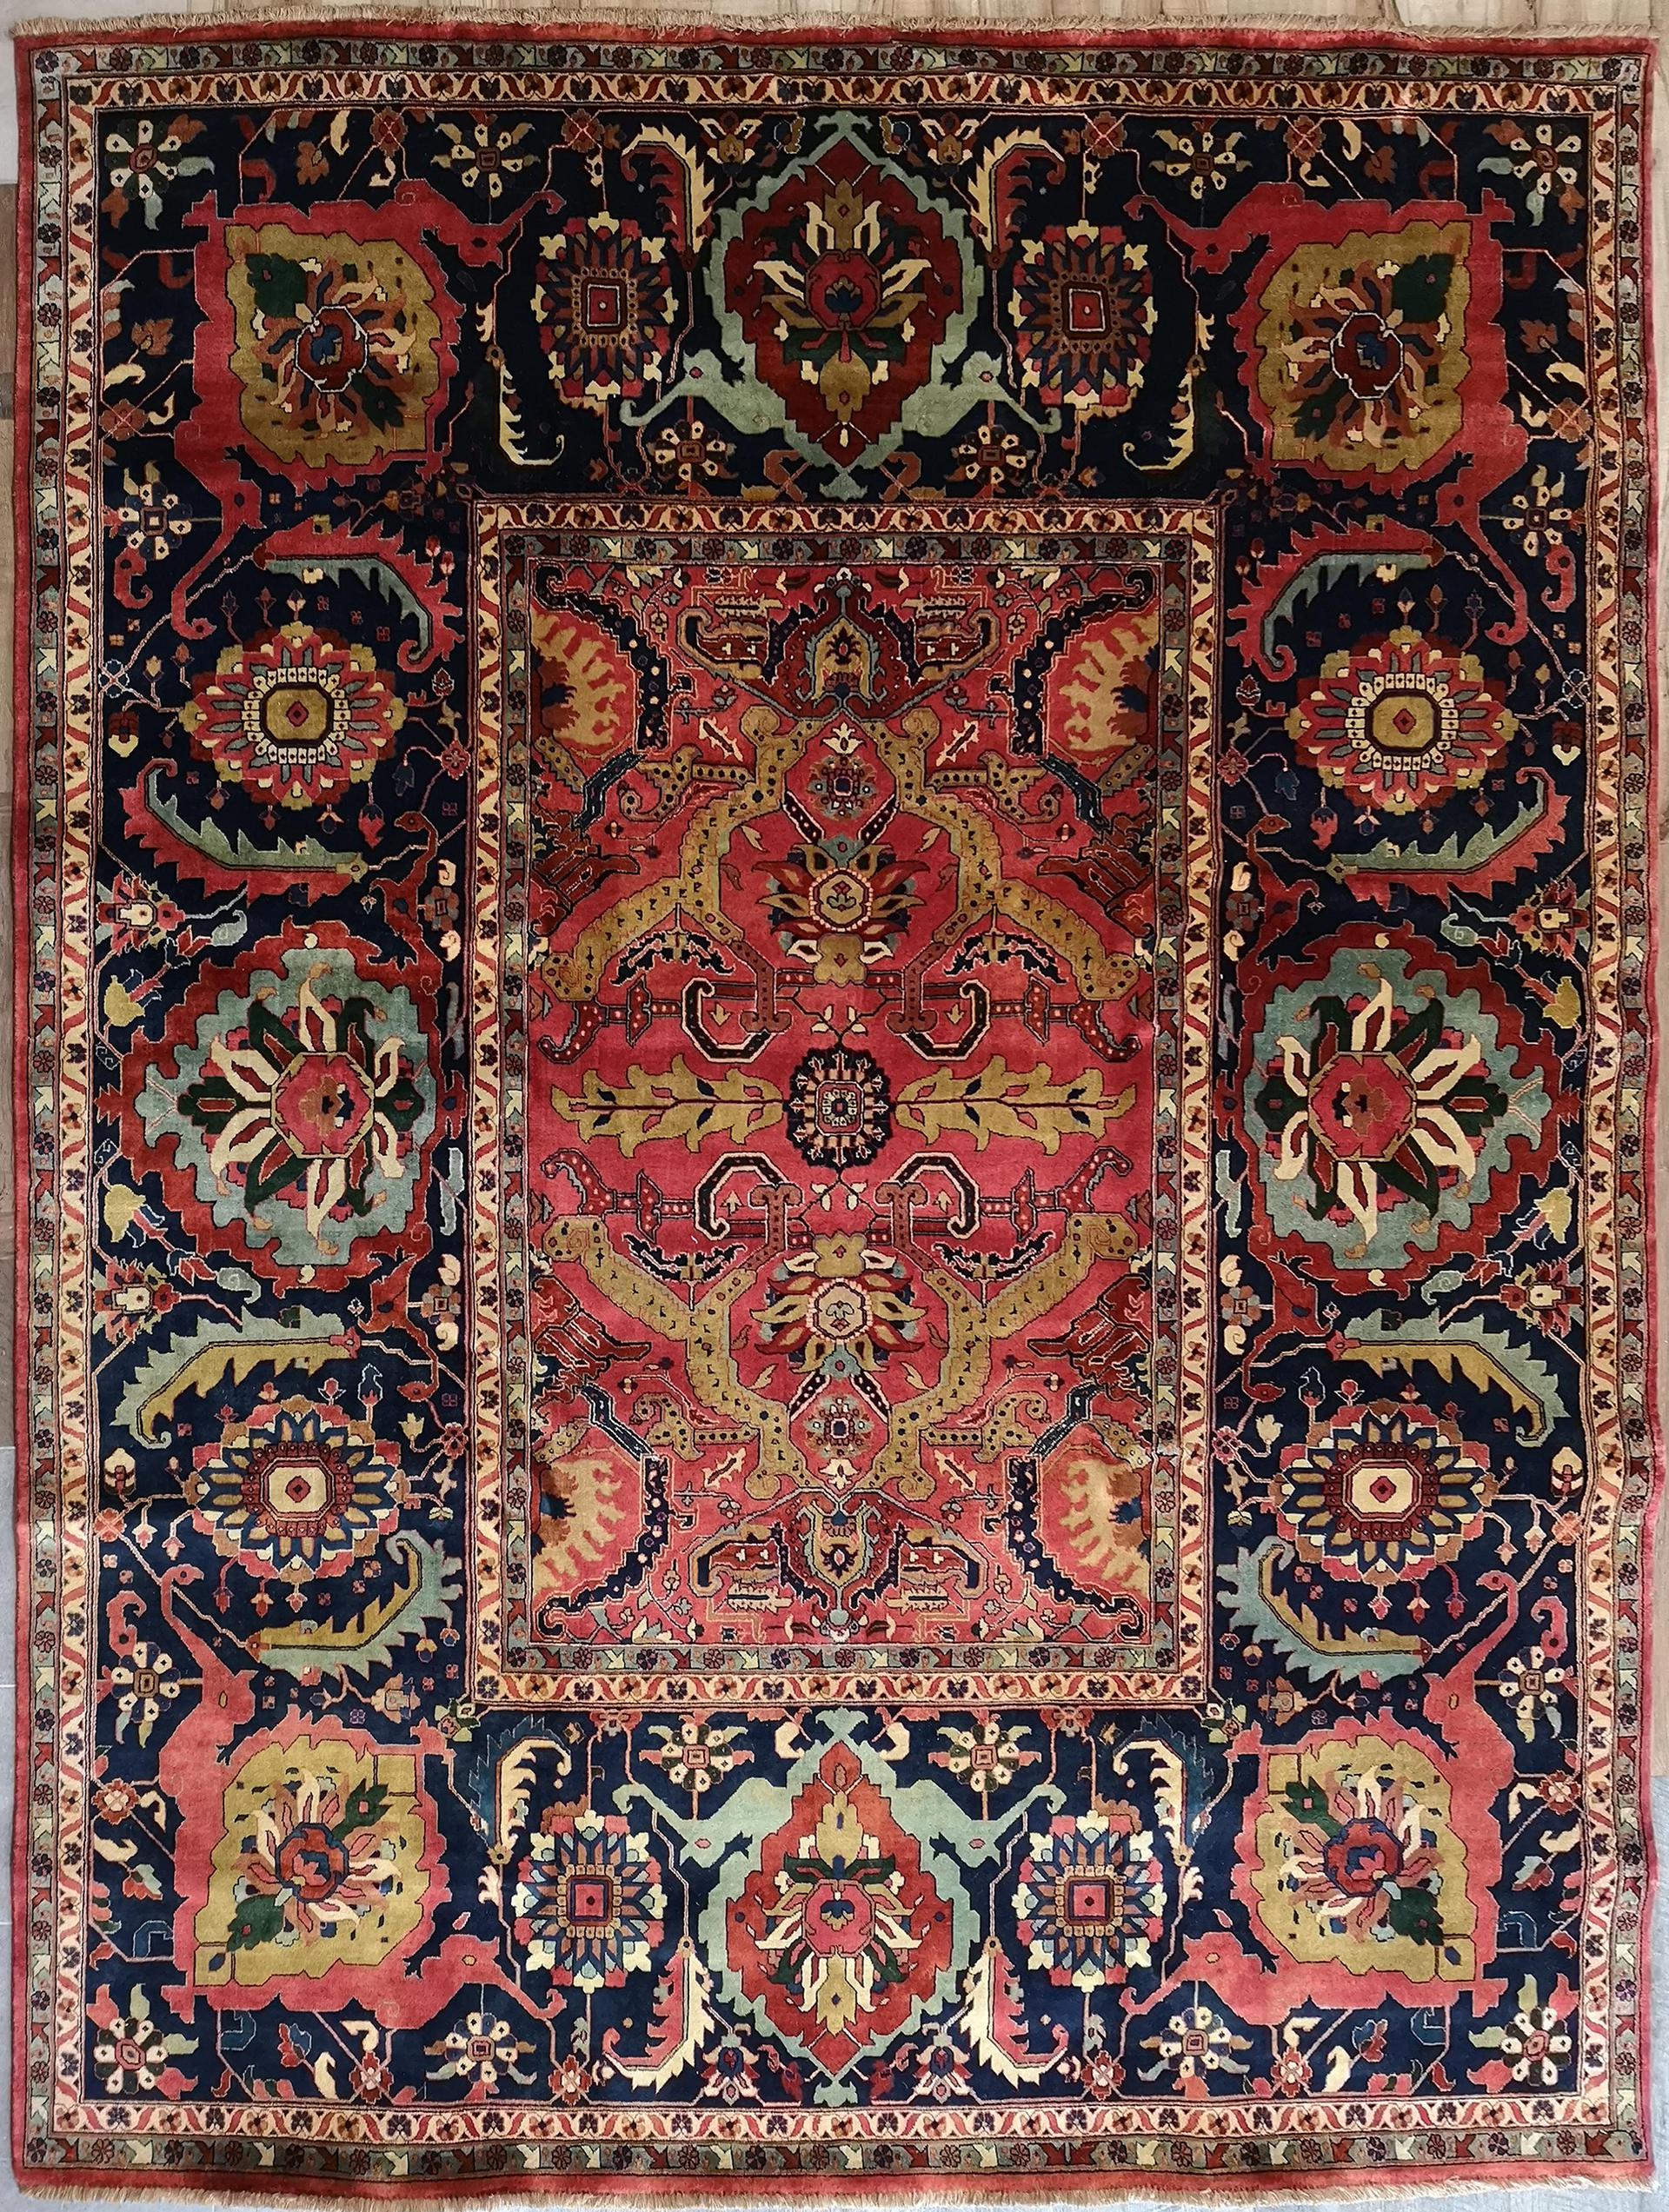 Hand Knotted Indian Sultanabad Rug Ref 2700 304 X 247cm Little Persia